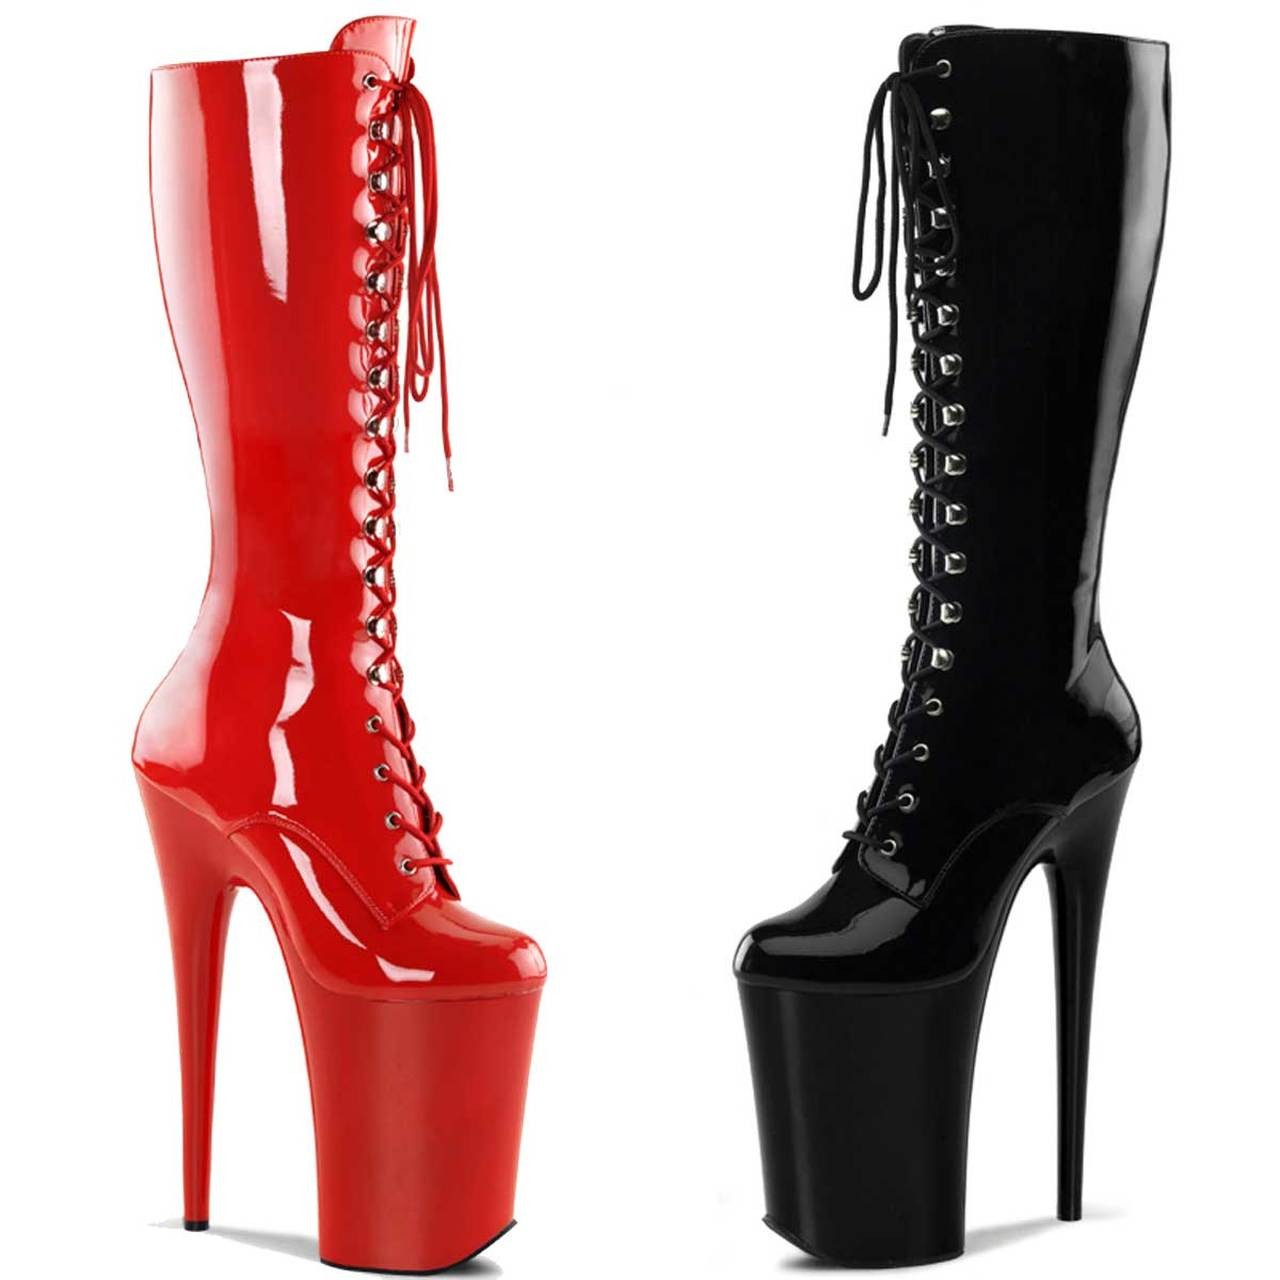 Infinity-2020 Extreme High Heel Lace up Knee Boots